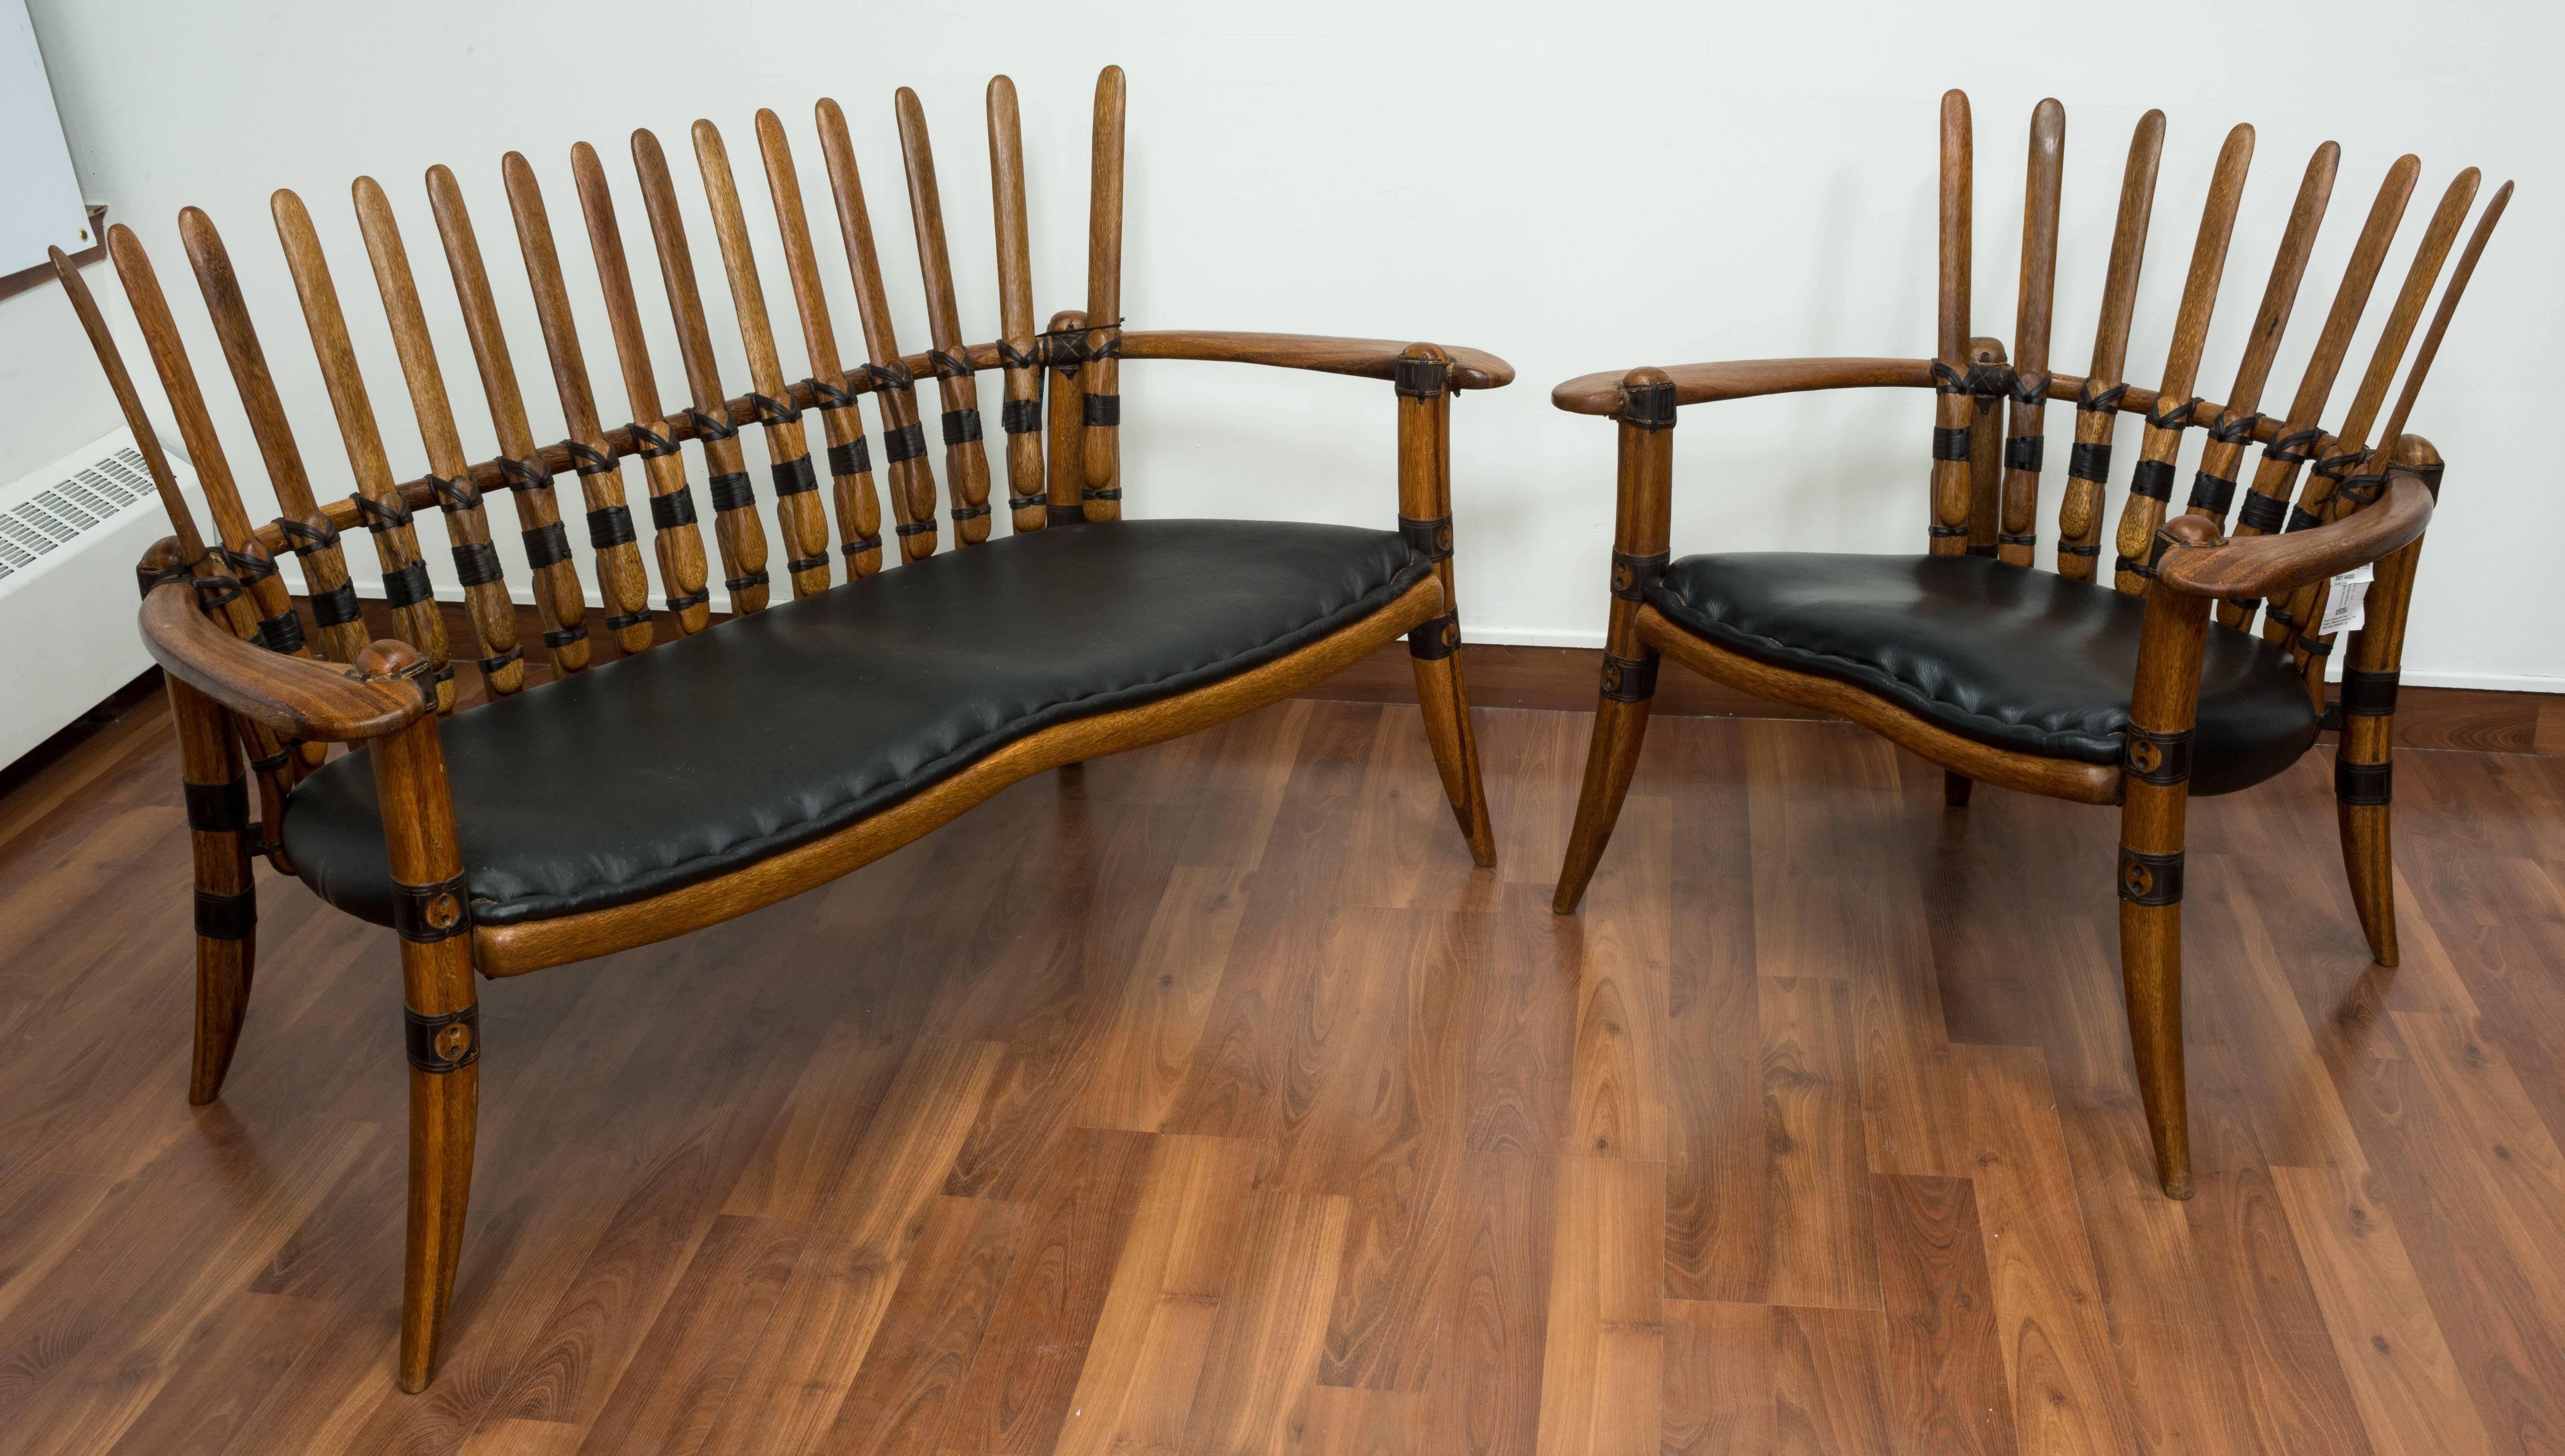 Polished palmwood frames. Joints made of leather bindings previously used for as handles. Latex seats upholstered in black leather, backs in lambskin.

Bruce Dowse for pacific green.

Measures: Easy chair H 88, W 85, D 77 cm.
 